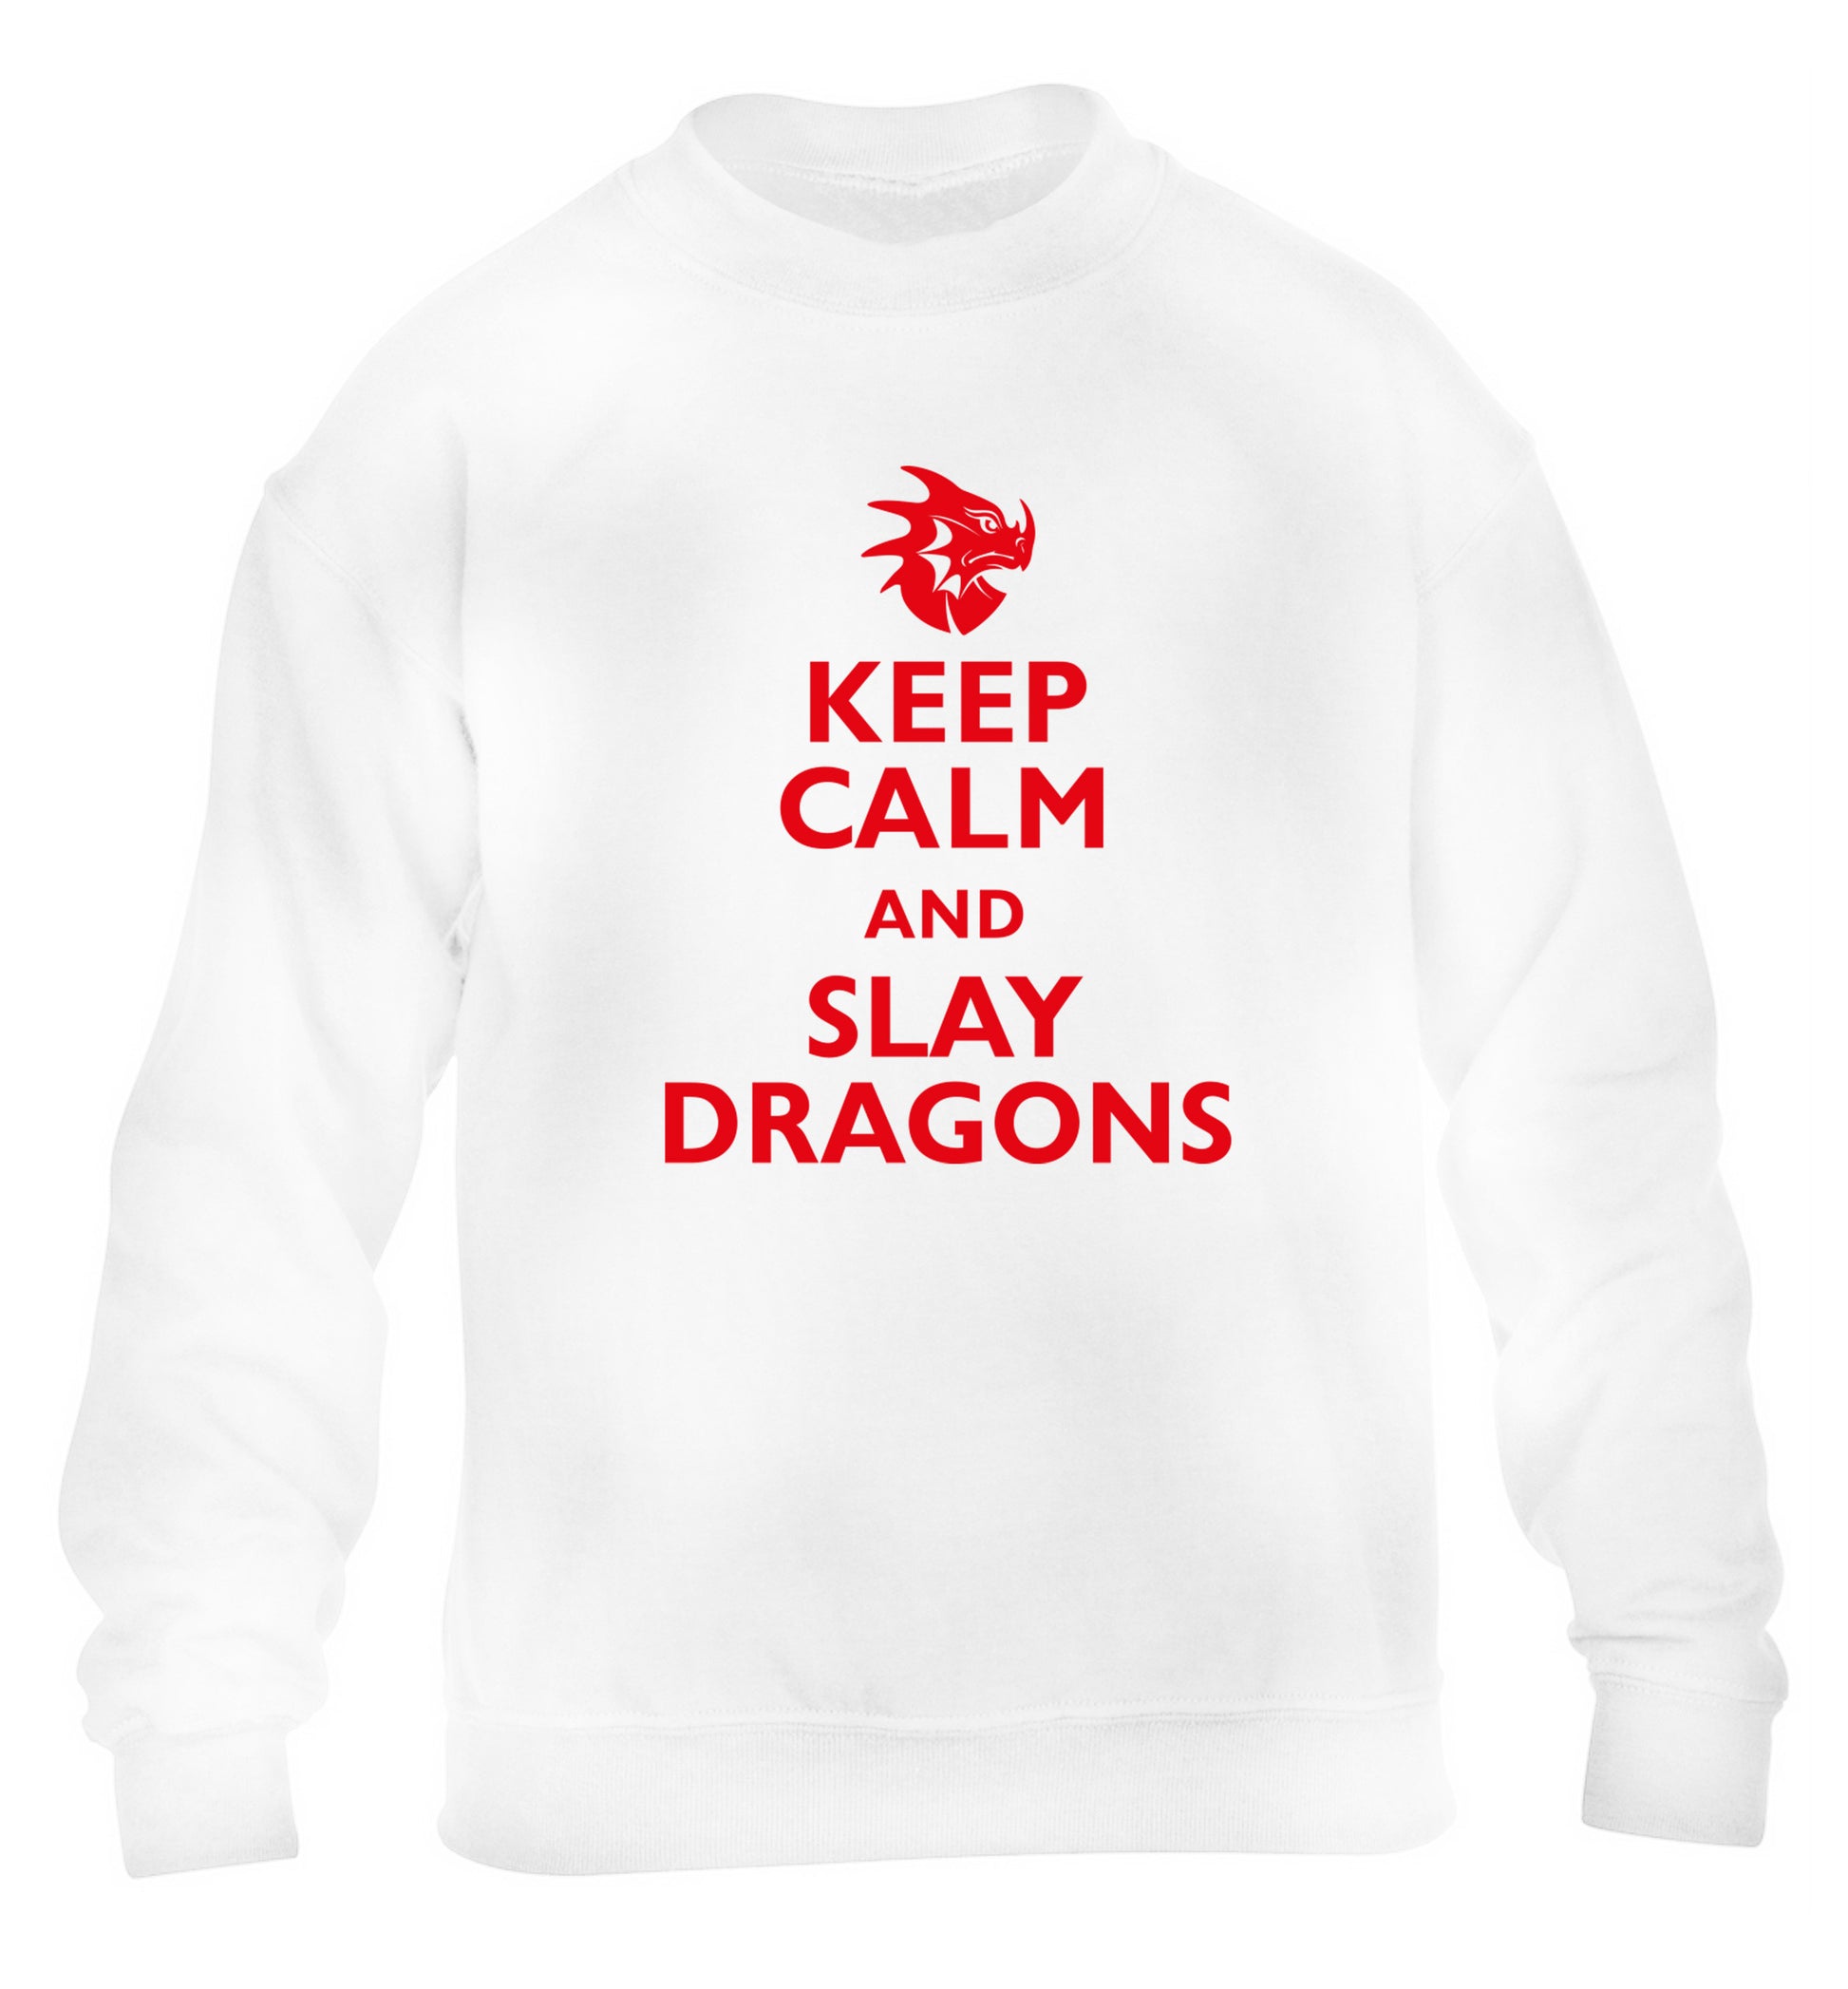 Keep calm and slay dragons children's white sweater 12-14 Years